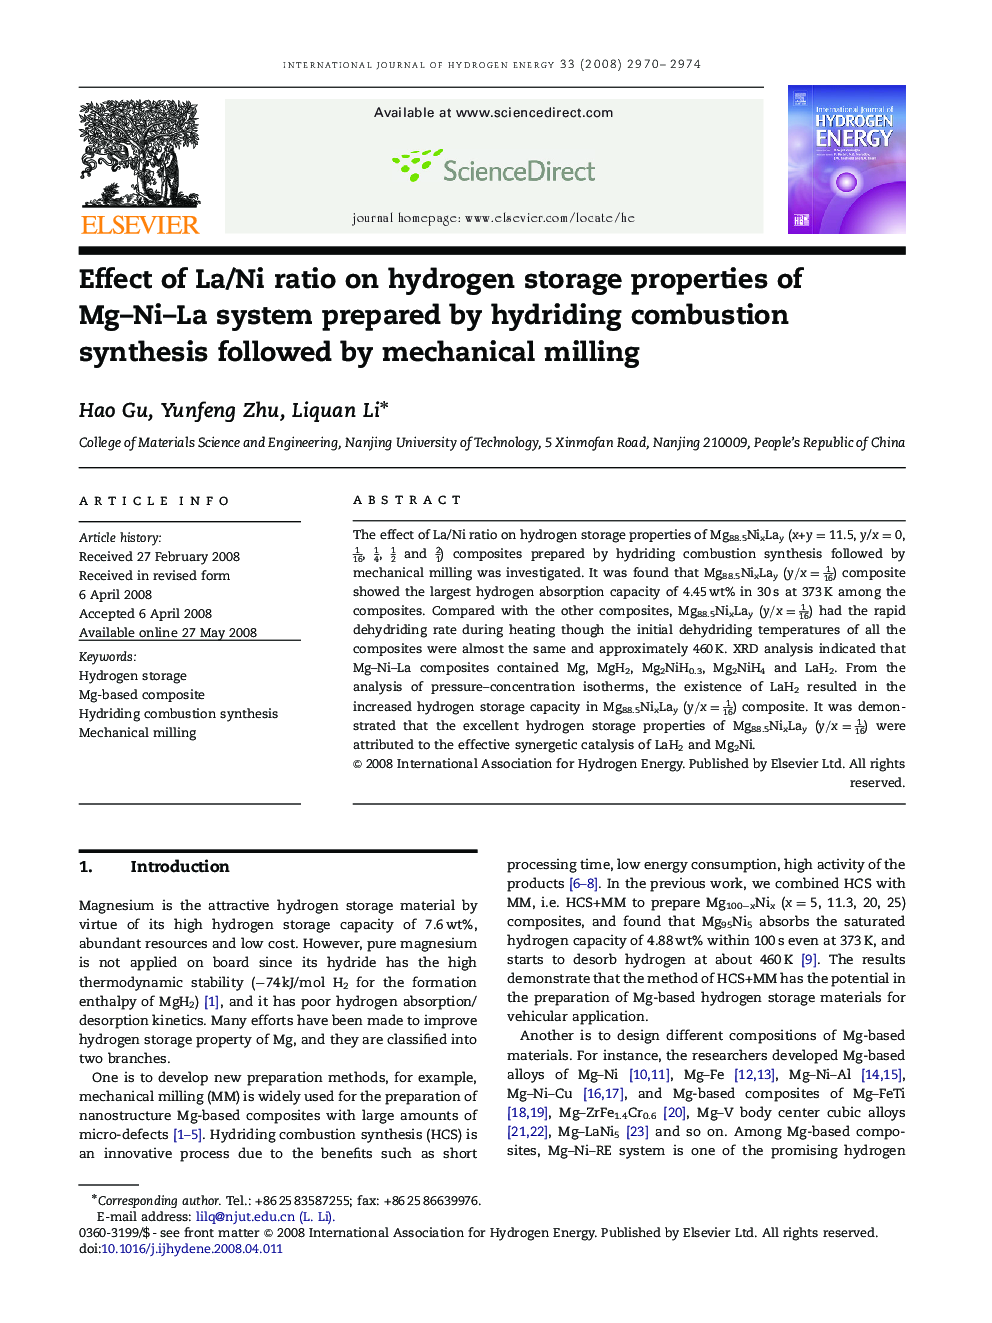 Effect of La/Ni ratio on hydrogen storage properties of Mg–Ni–La system prepared by hydriding combustion synthesis followed by mechanical milling